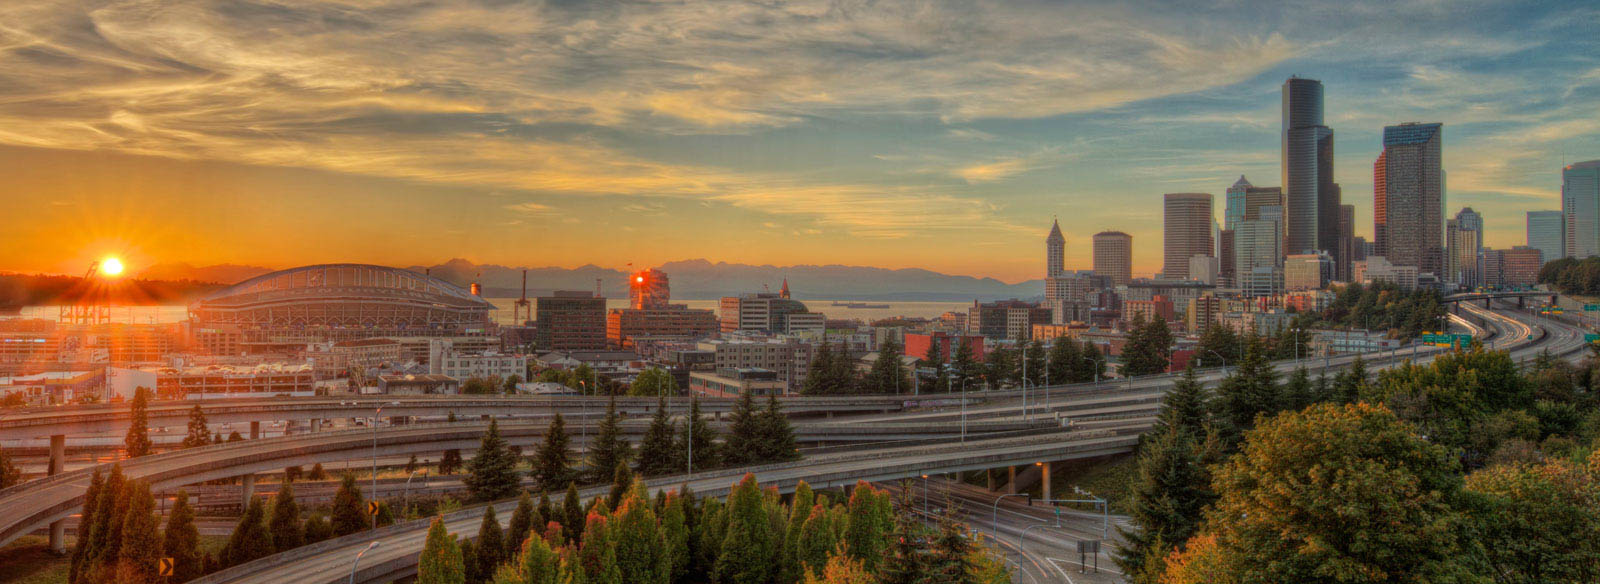 Overview of the City of Seattle During Sunset